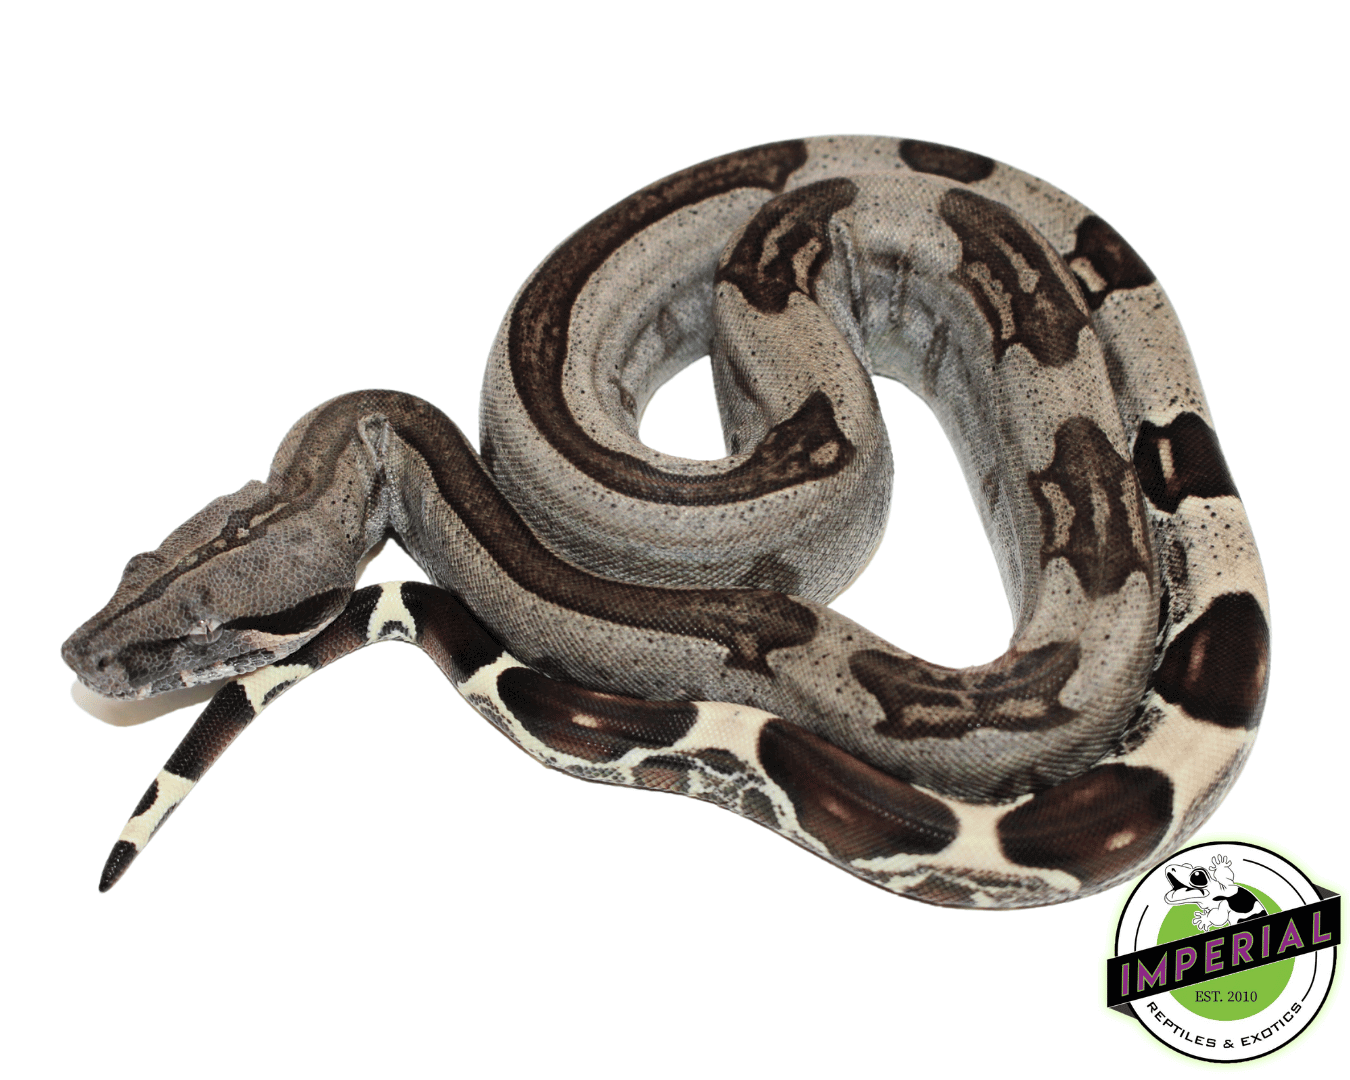 guyana red tail boa constrictor for sale, buy reptiles online